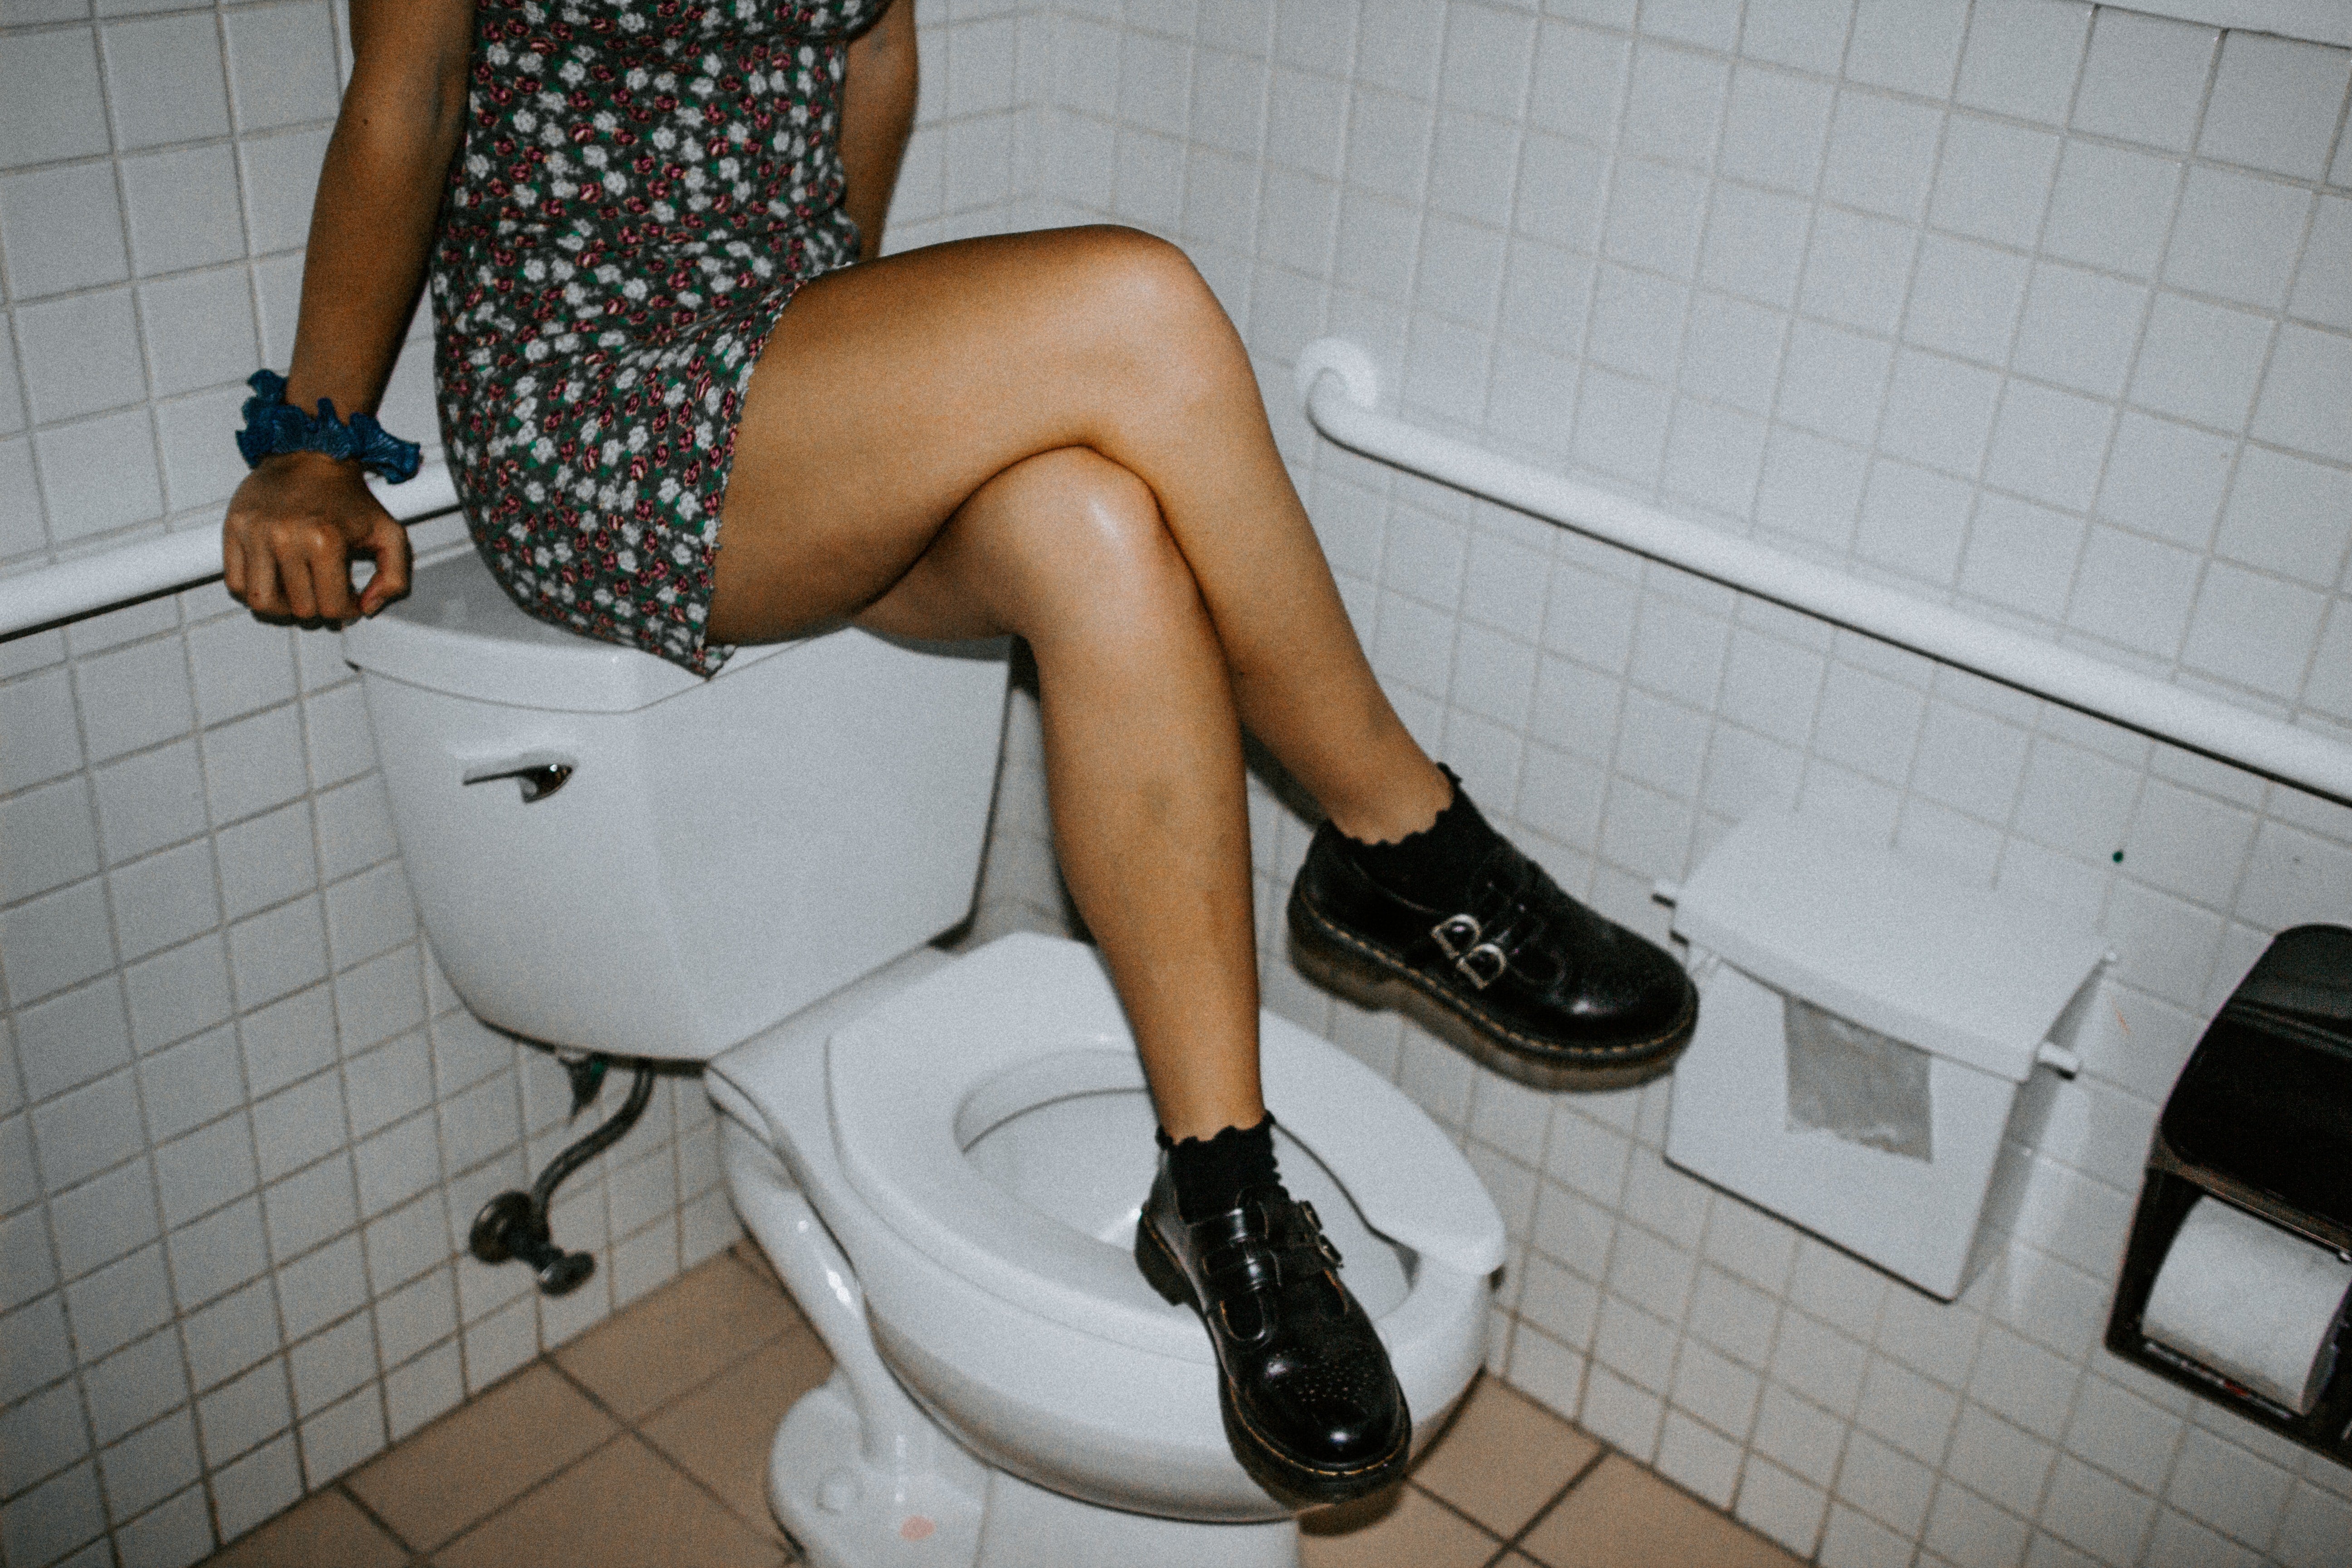 Urinary tract infections could be caused by holding your pee, a survey suggests. image photo